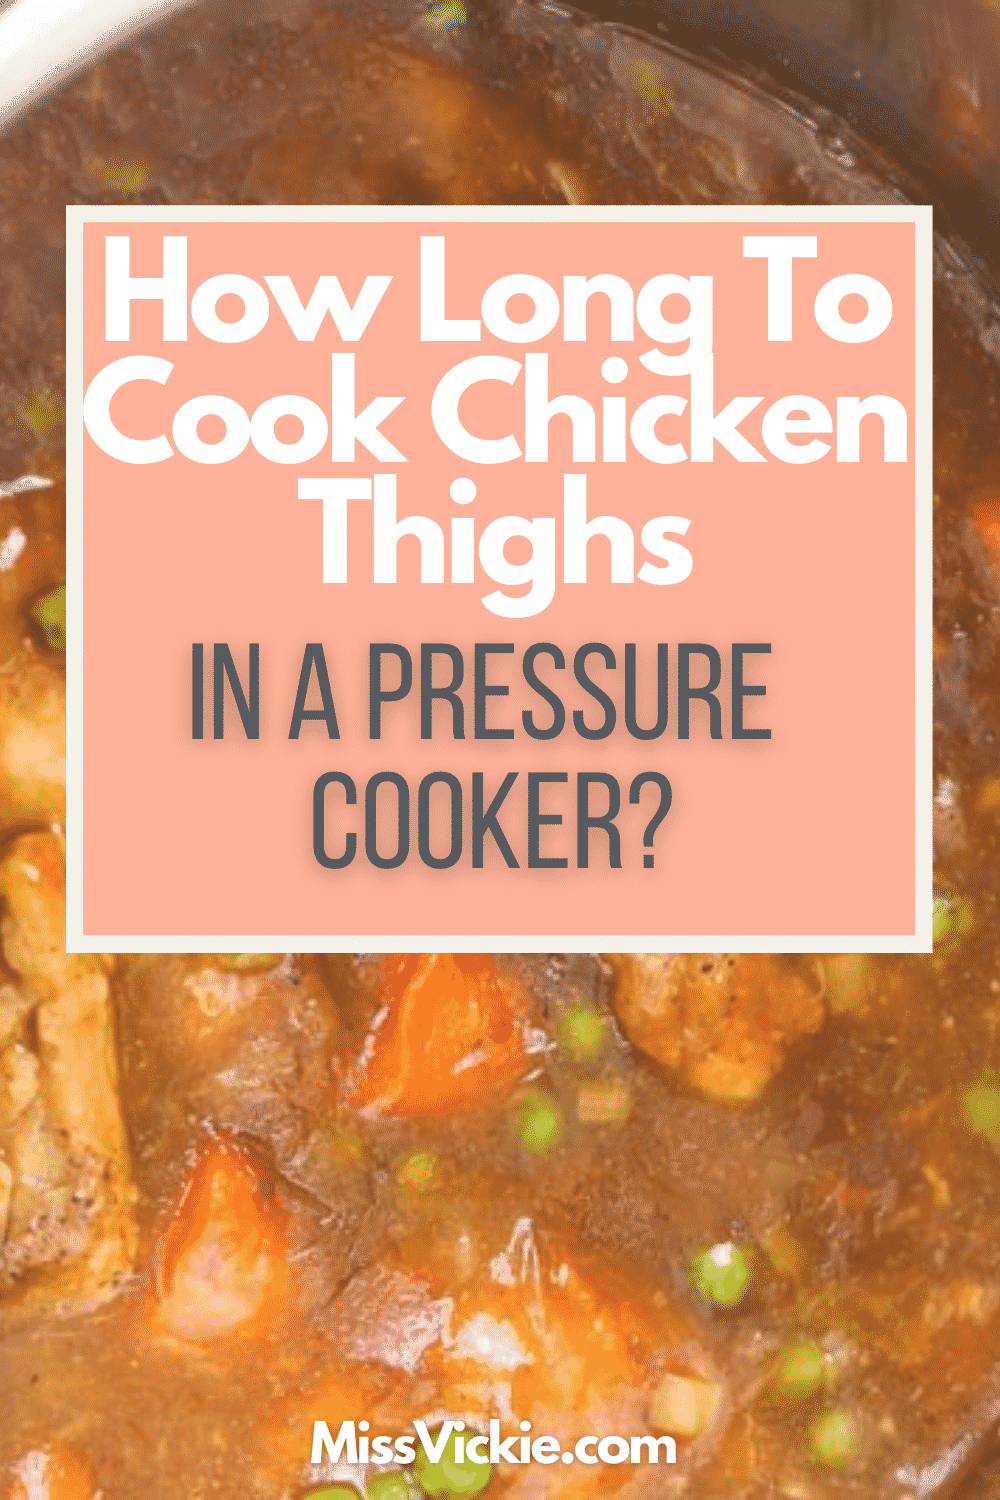 How Long To Cook Chicken Thighs In A Pressure Cooker